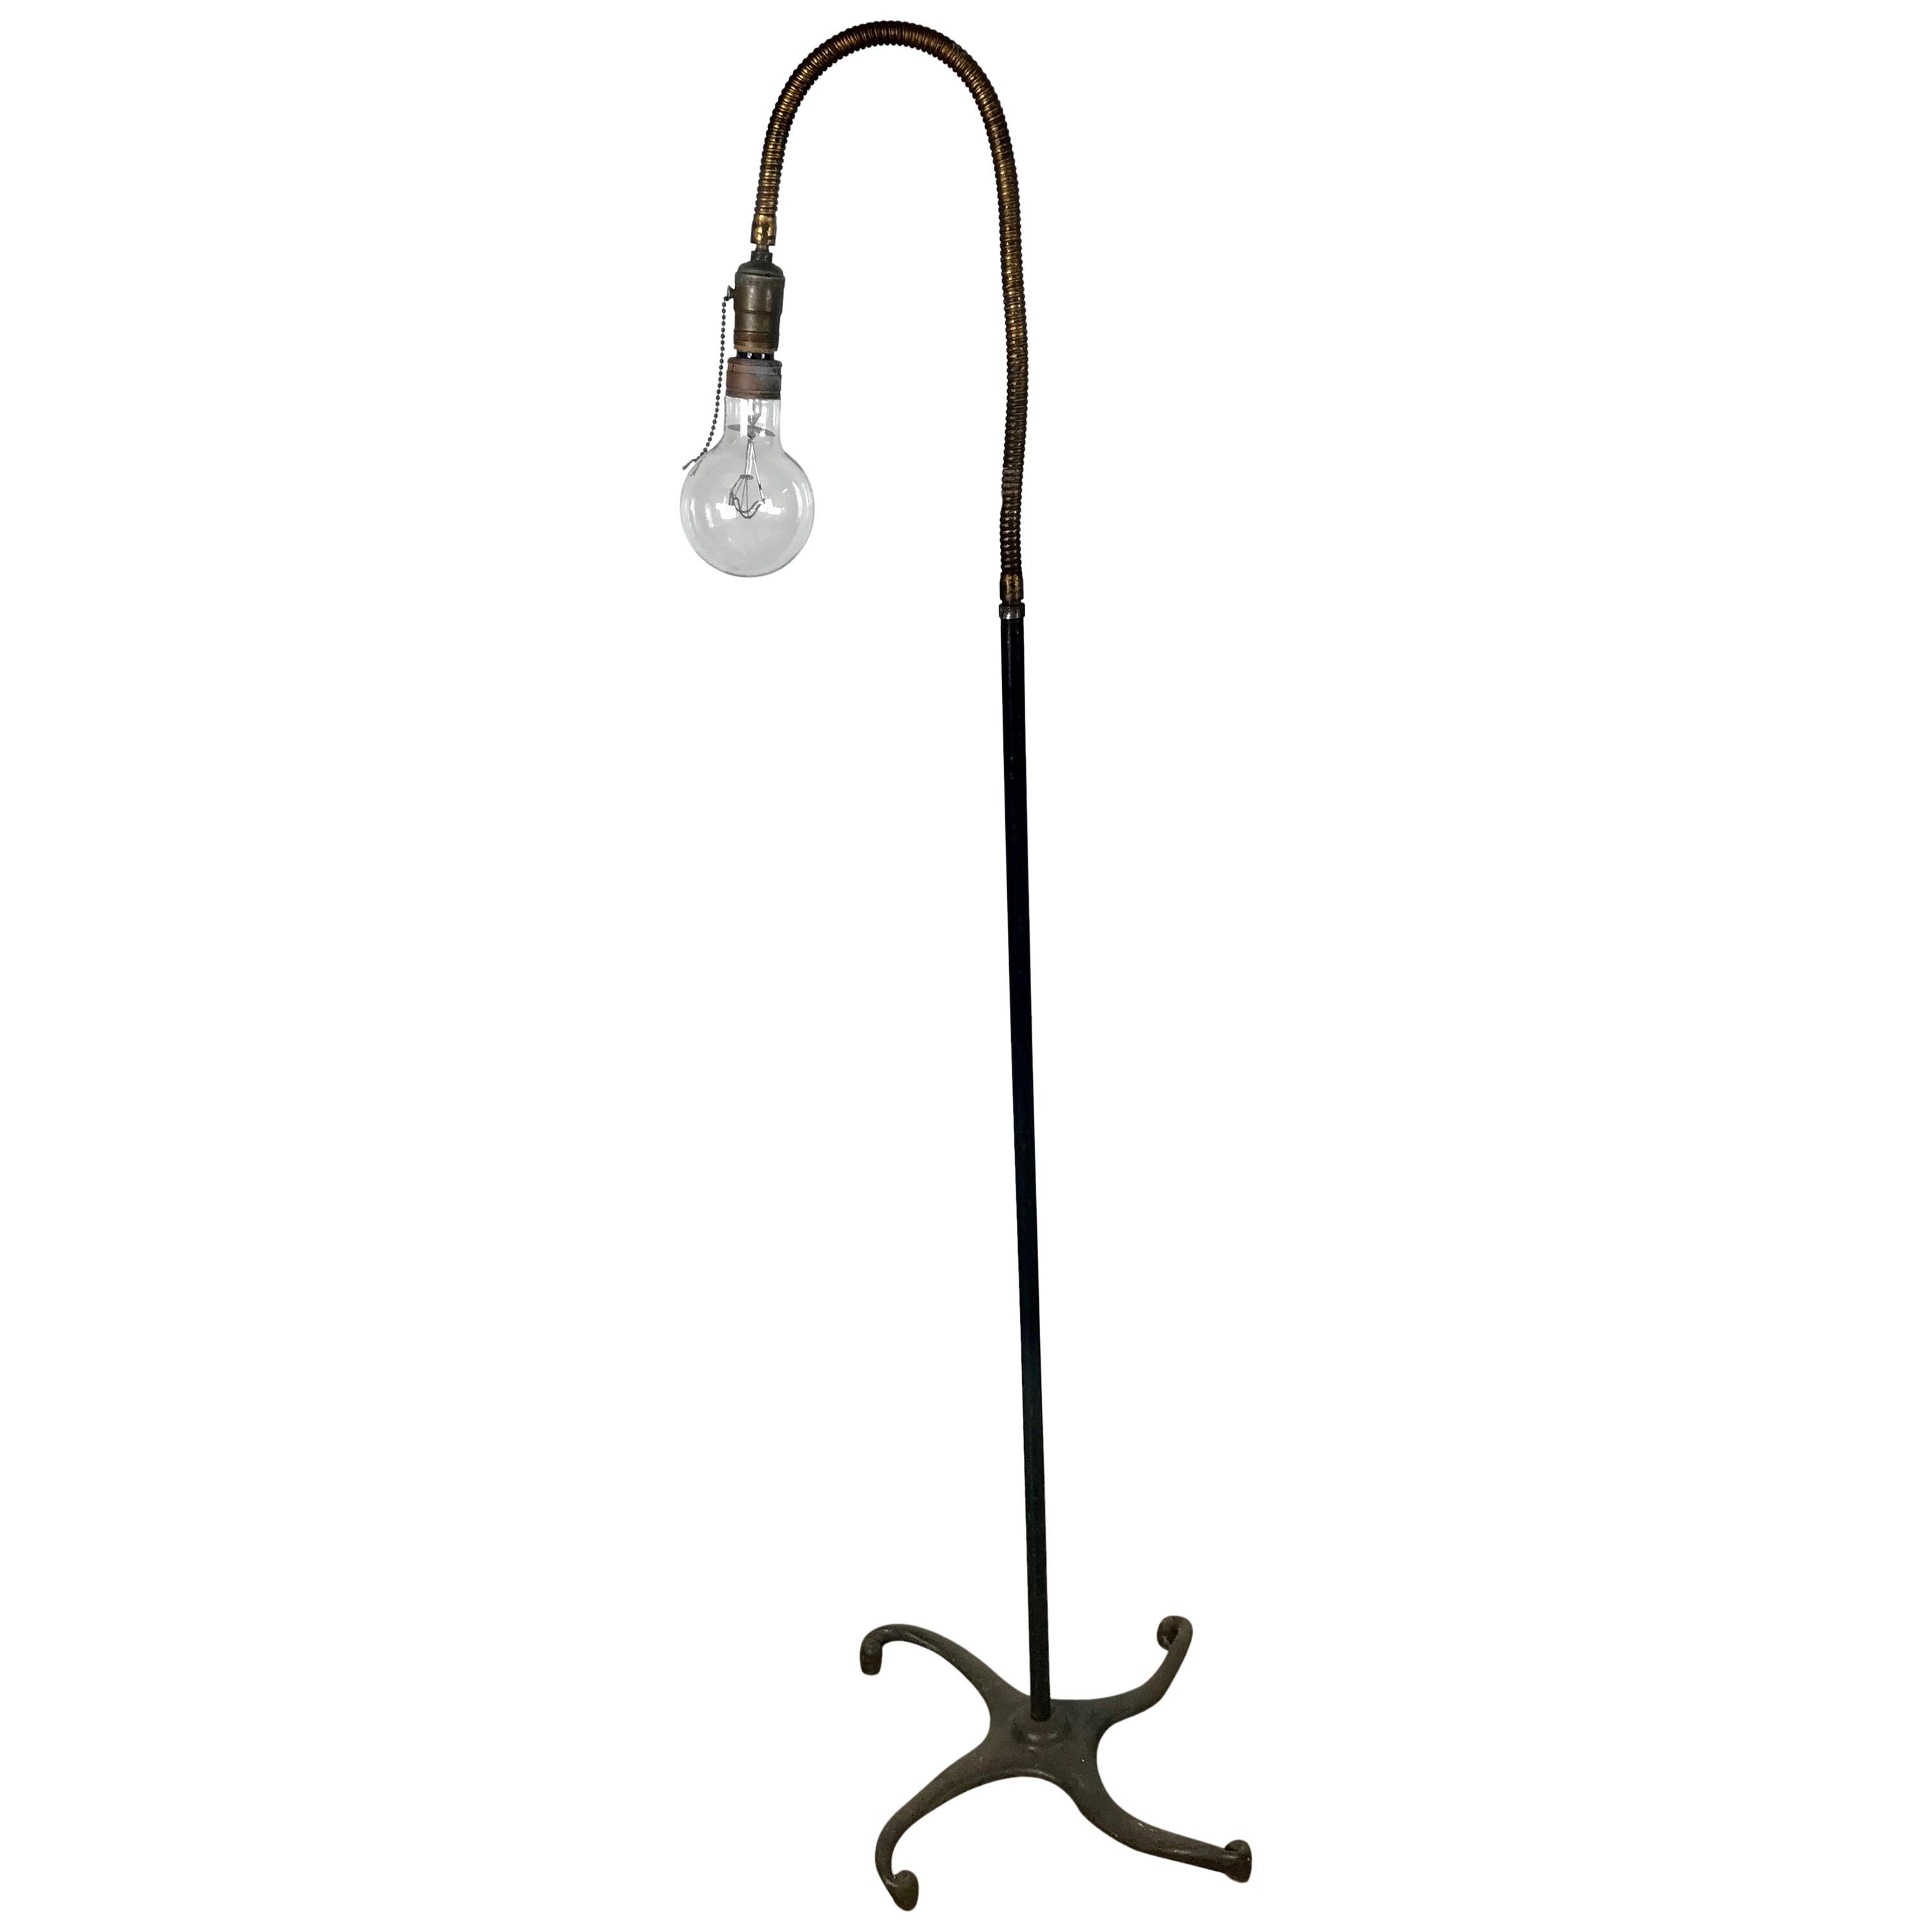 Unusual Cast Iron and Brass Goose-Neck Industrial Floor Lamp, by Hendryx For Sale